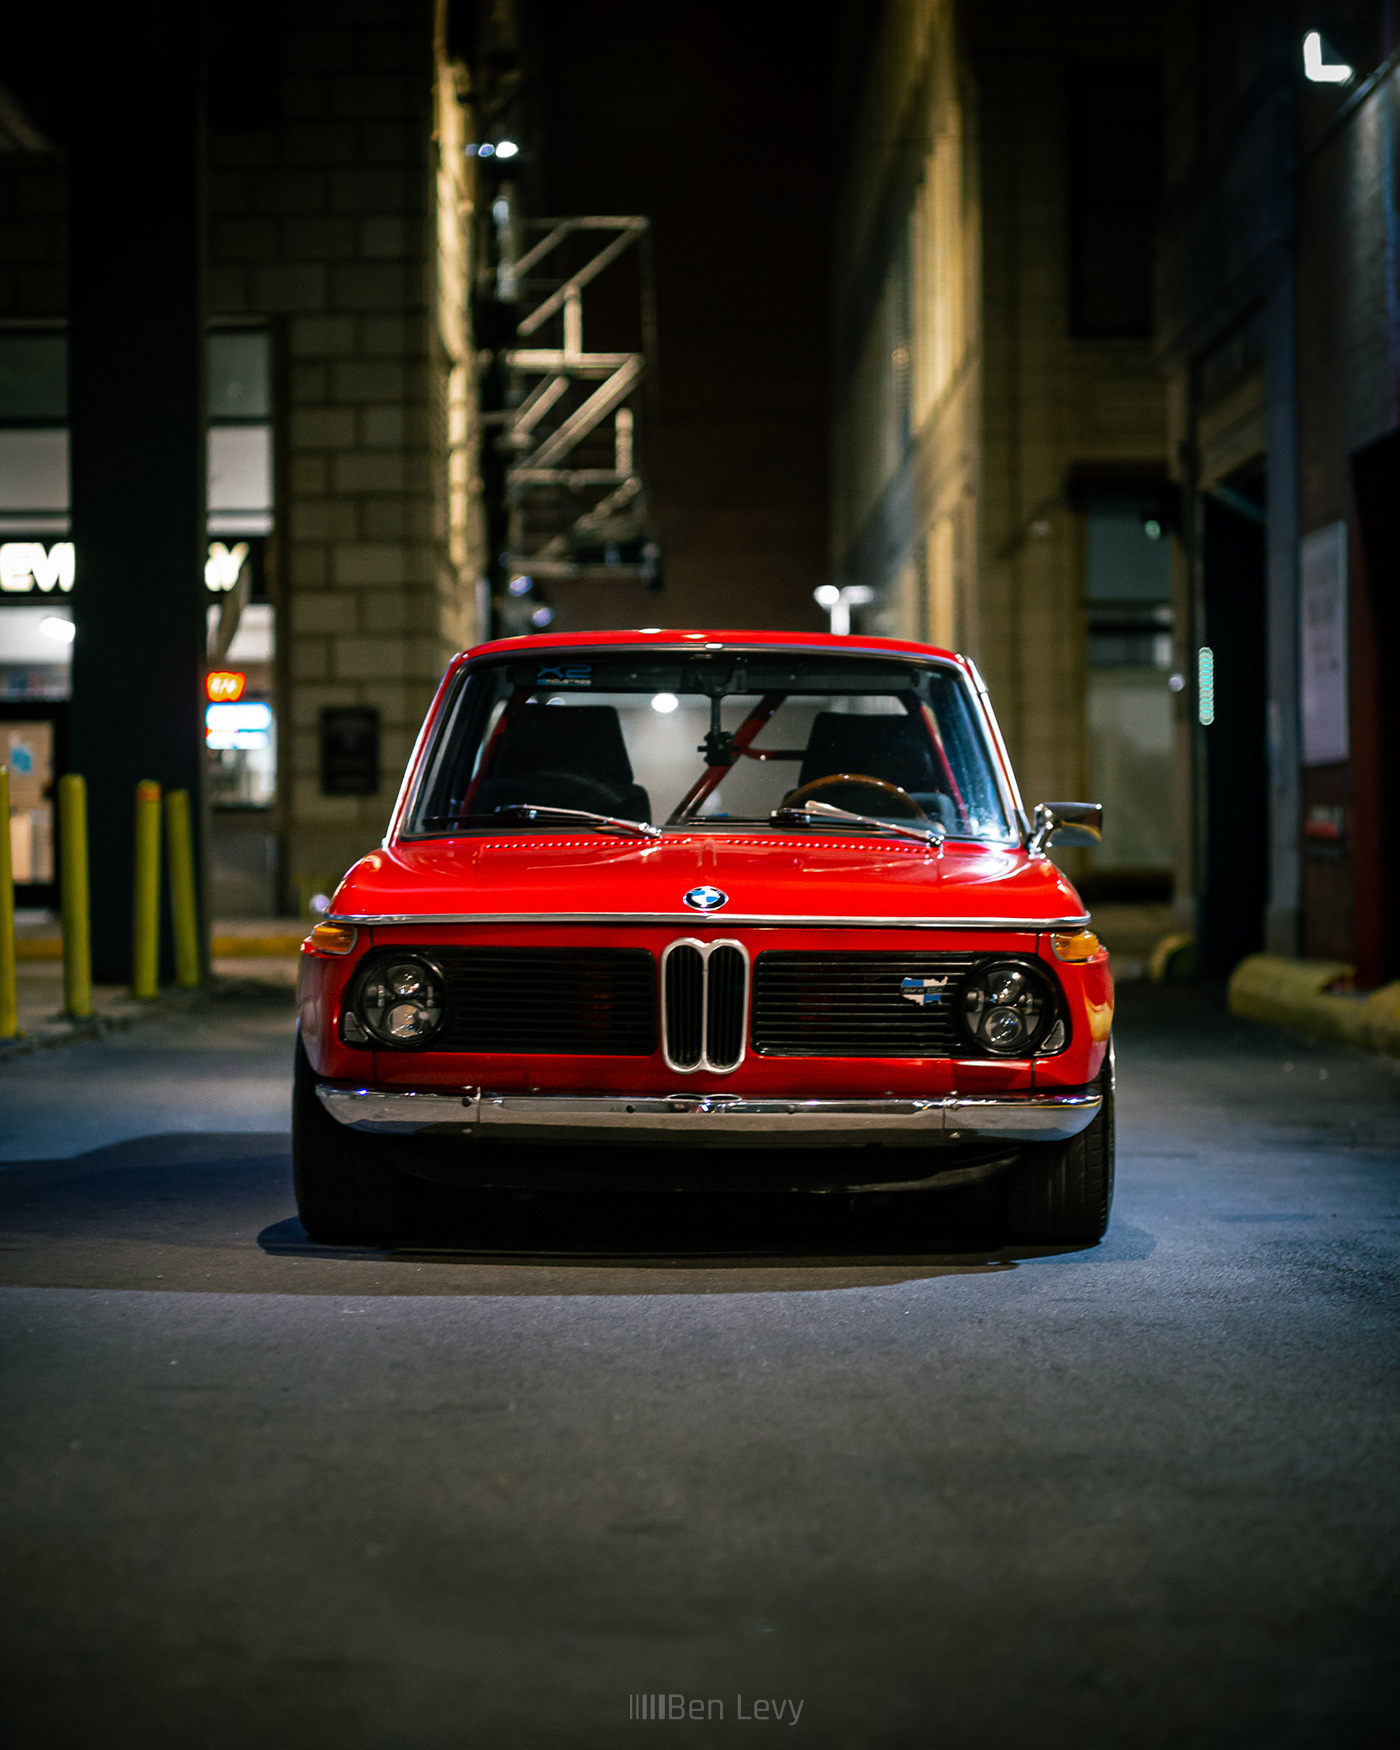 Red BMW 2002 in a Chicago Alley